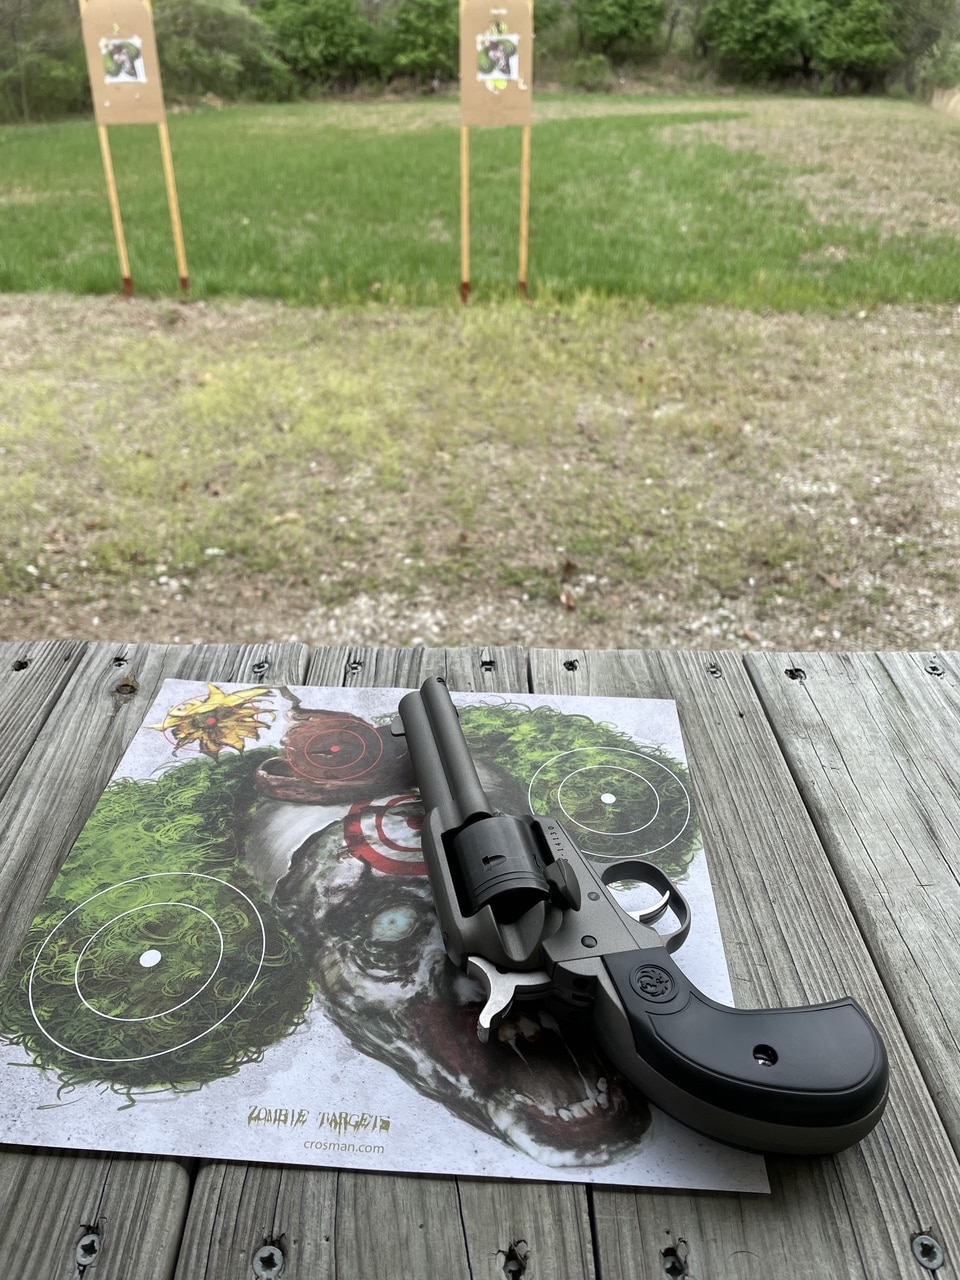 Zombie targets and Wrangler